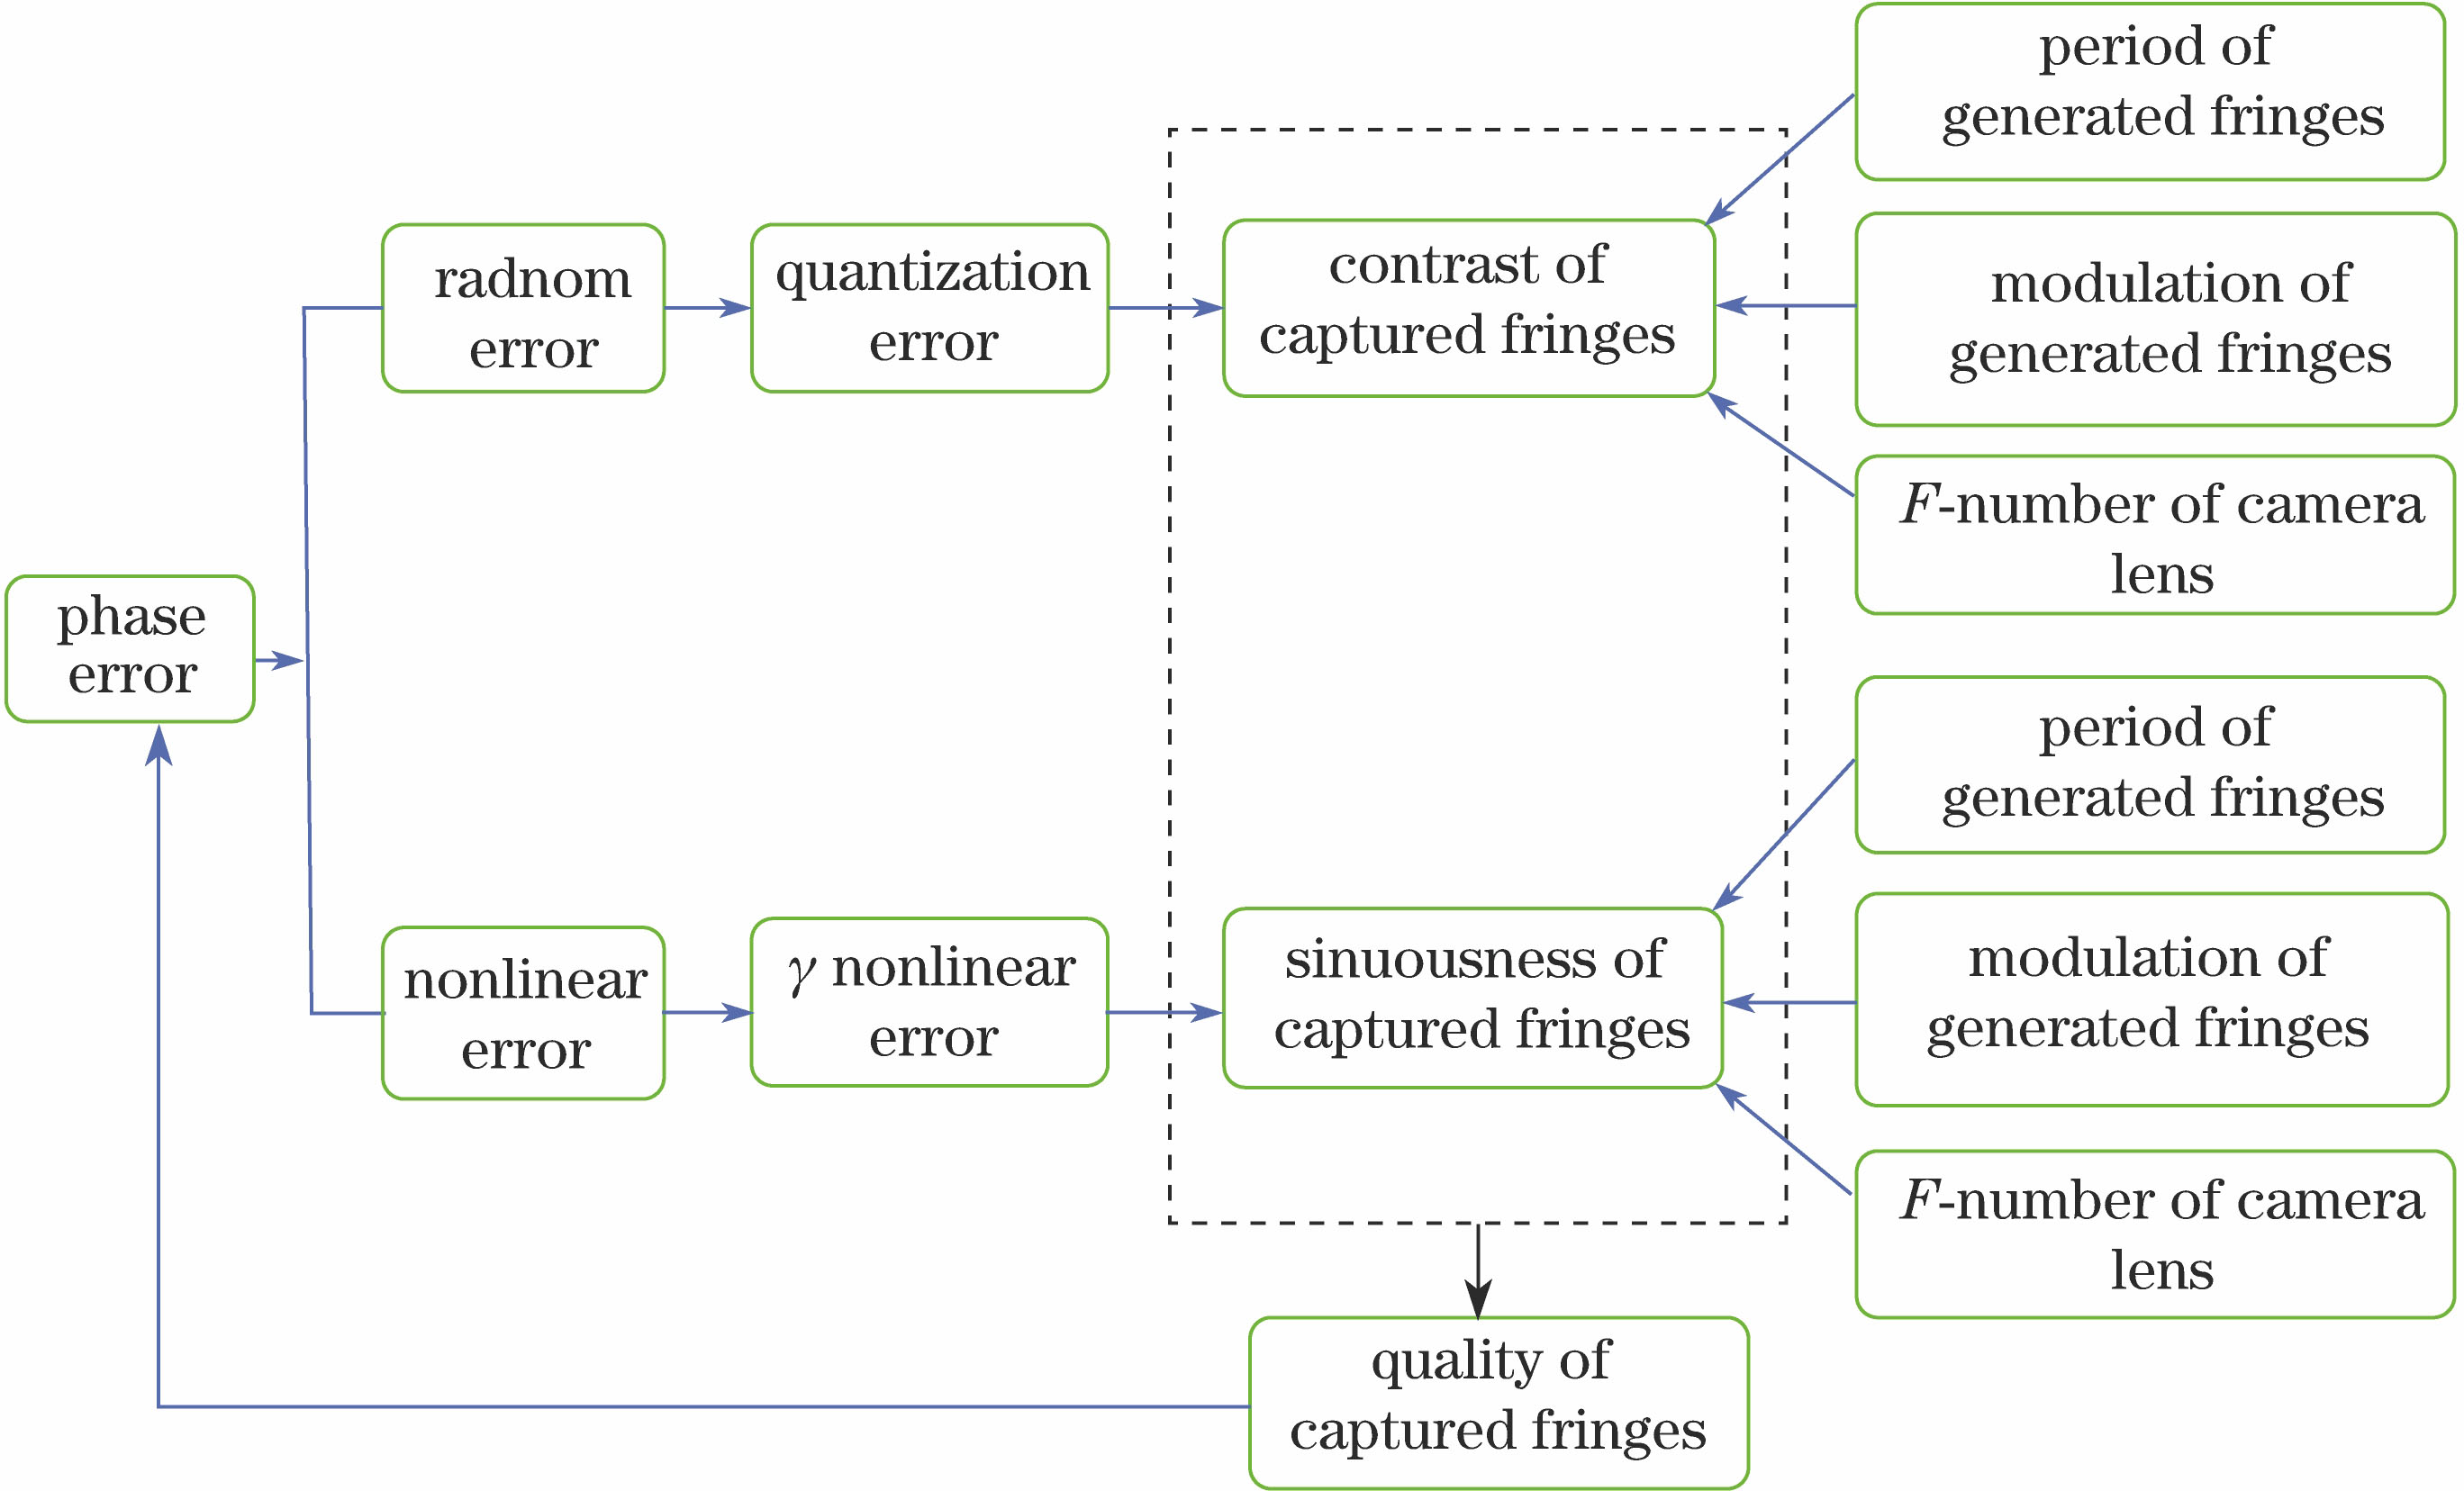 Fringe quality analysis model in PMD system